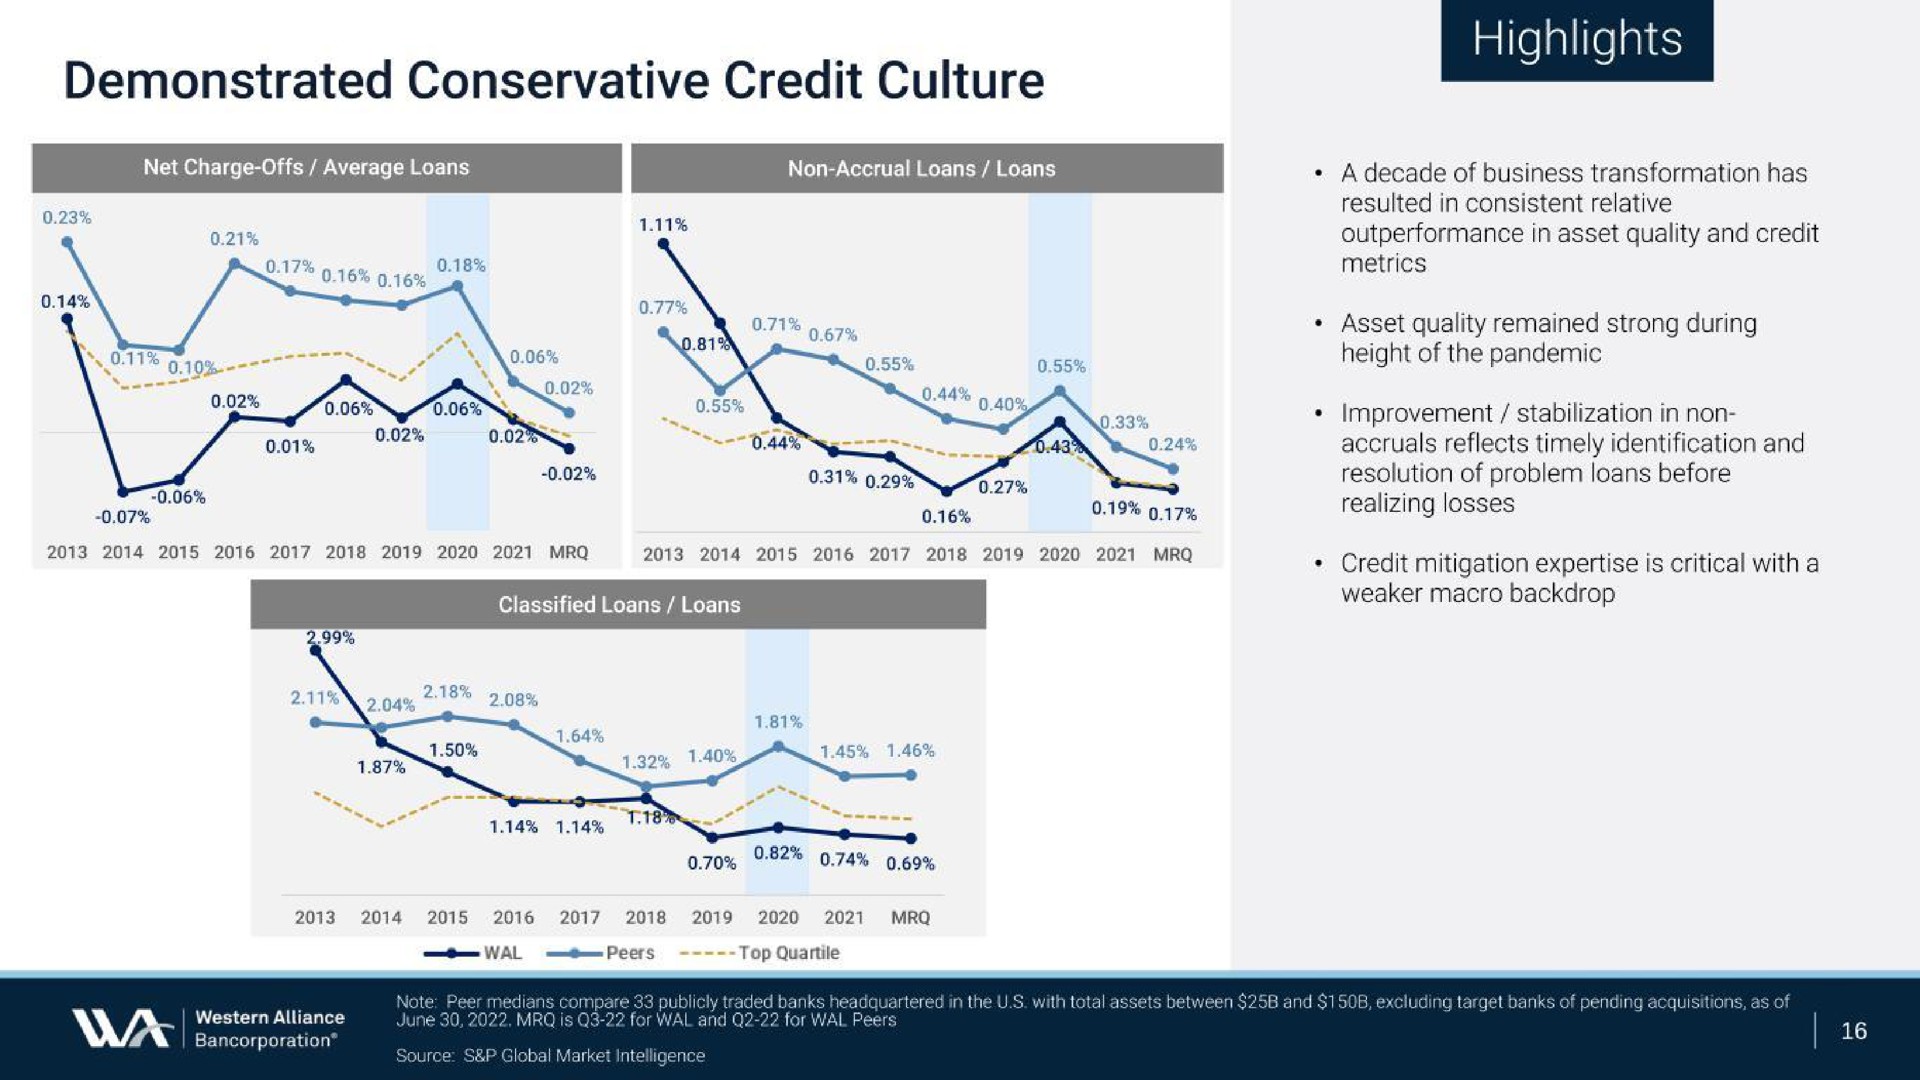 demonstrated conservative credit culture highlights | Western Alliance Bancorporation